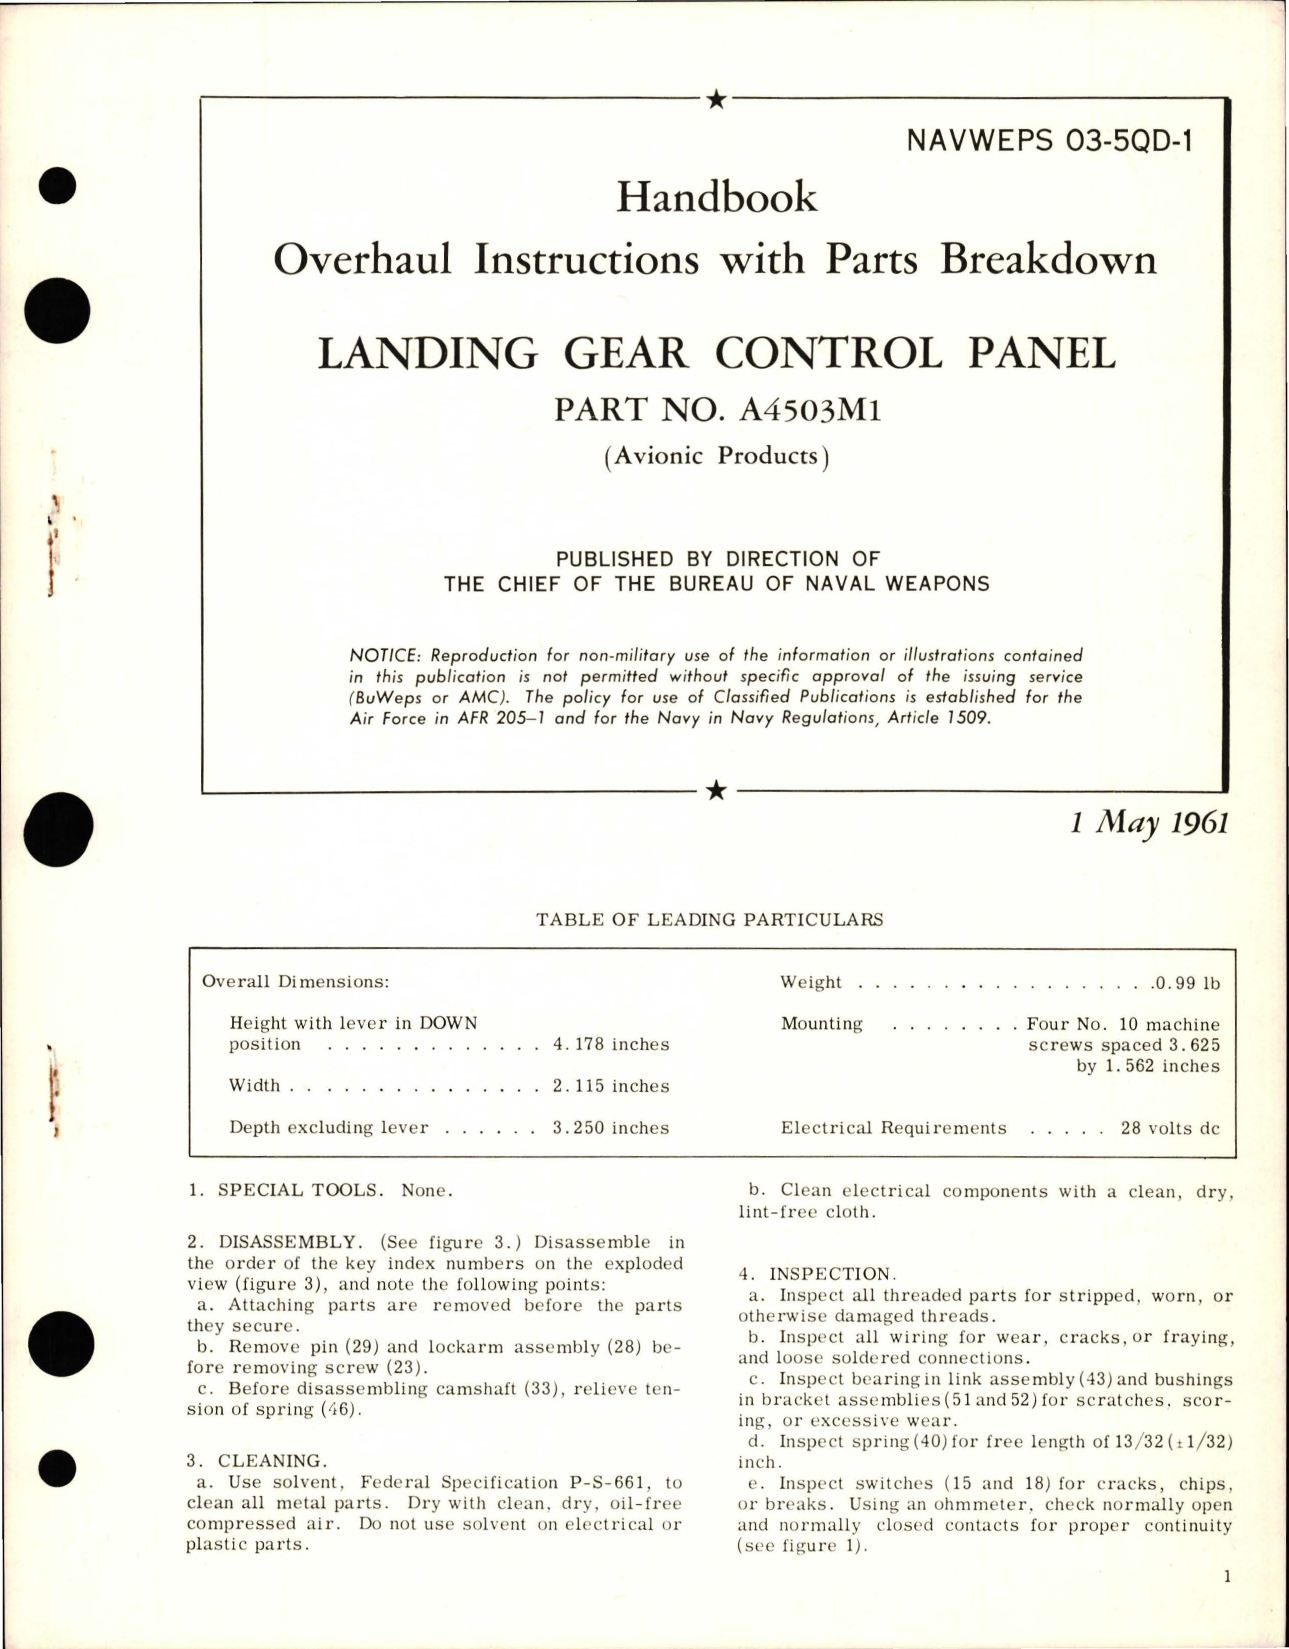 Sample page 1 from AirCorps Library document: Overhaul Instructions with Parts Breakdown for Landing Gear Control Panel - Part A4503M1 